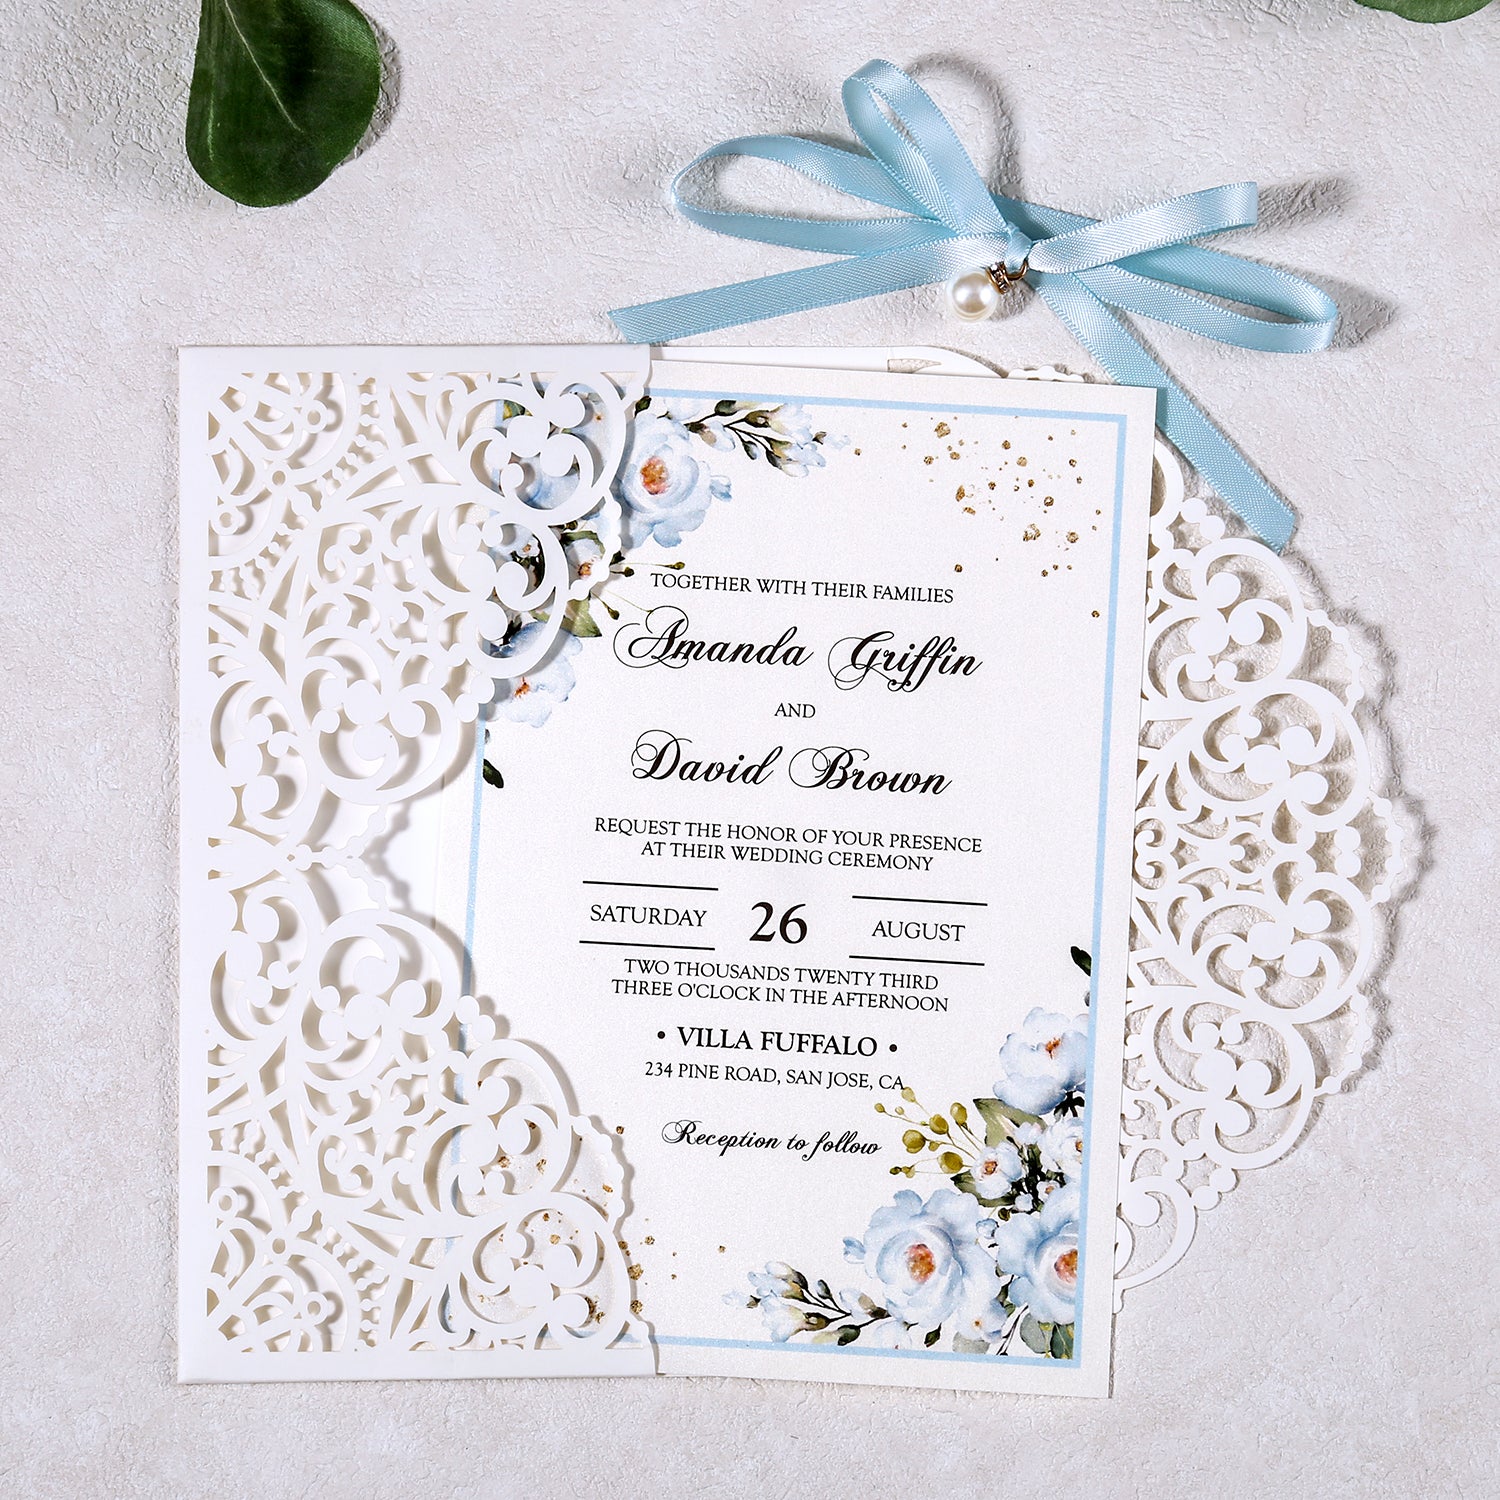 5 X 7.2" Laser Cut Hollow Rose Wedding invitations Cards With Blue Ribbon And Envelopes For Wedding - DorisHome